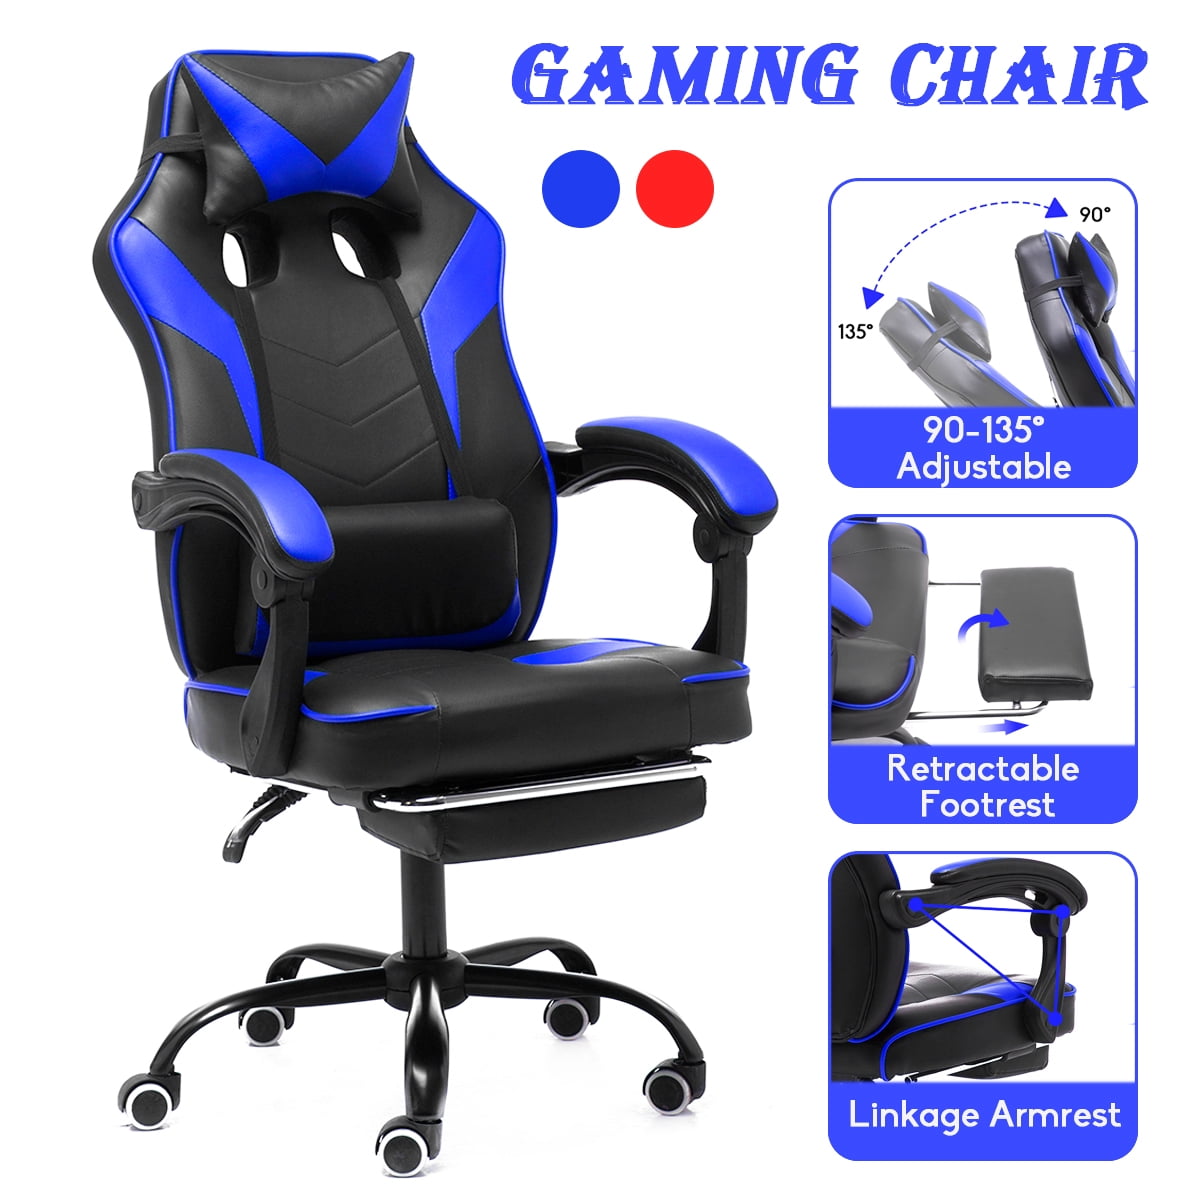 Details about   360 Degree Swivel Computer Desk Gamer Chair with Reclinable Backrest and Massage 